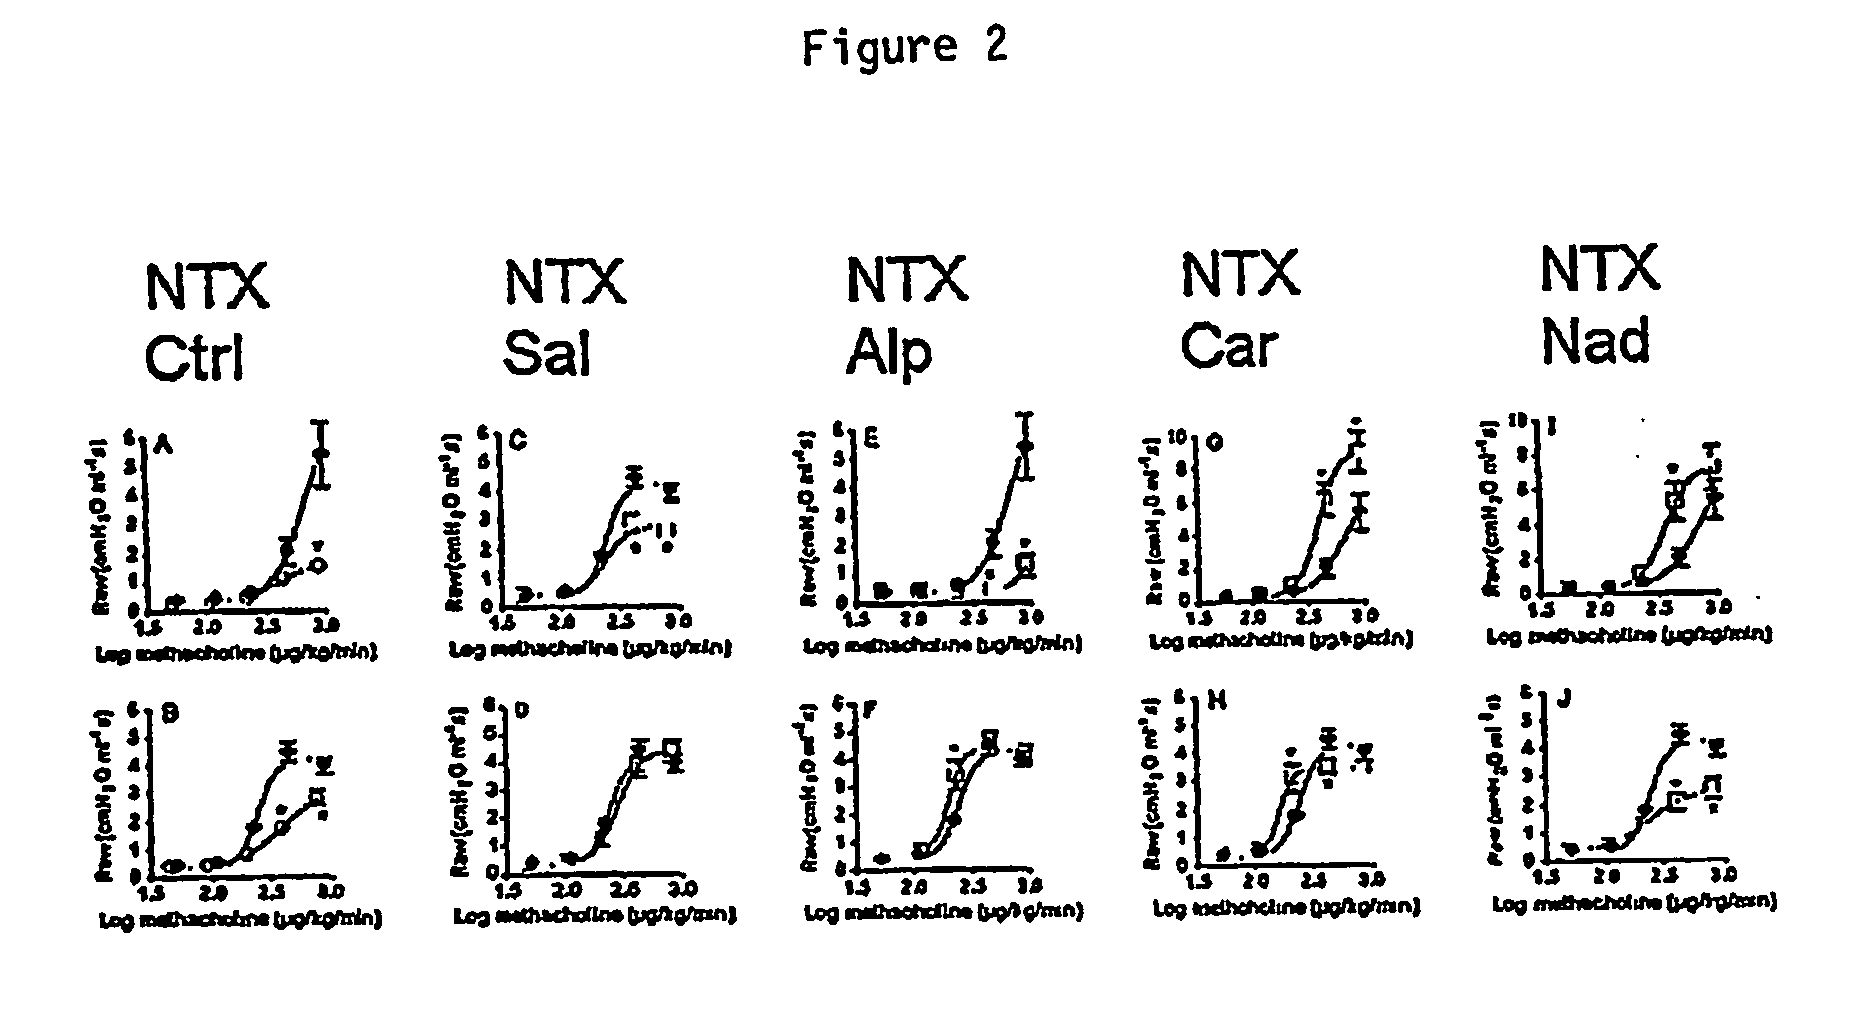 Methods for Treating Diseases and Conditions with Inverse Agonists and for Screening for Agents Acting as Inverse Agonists